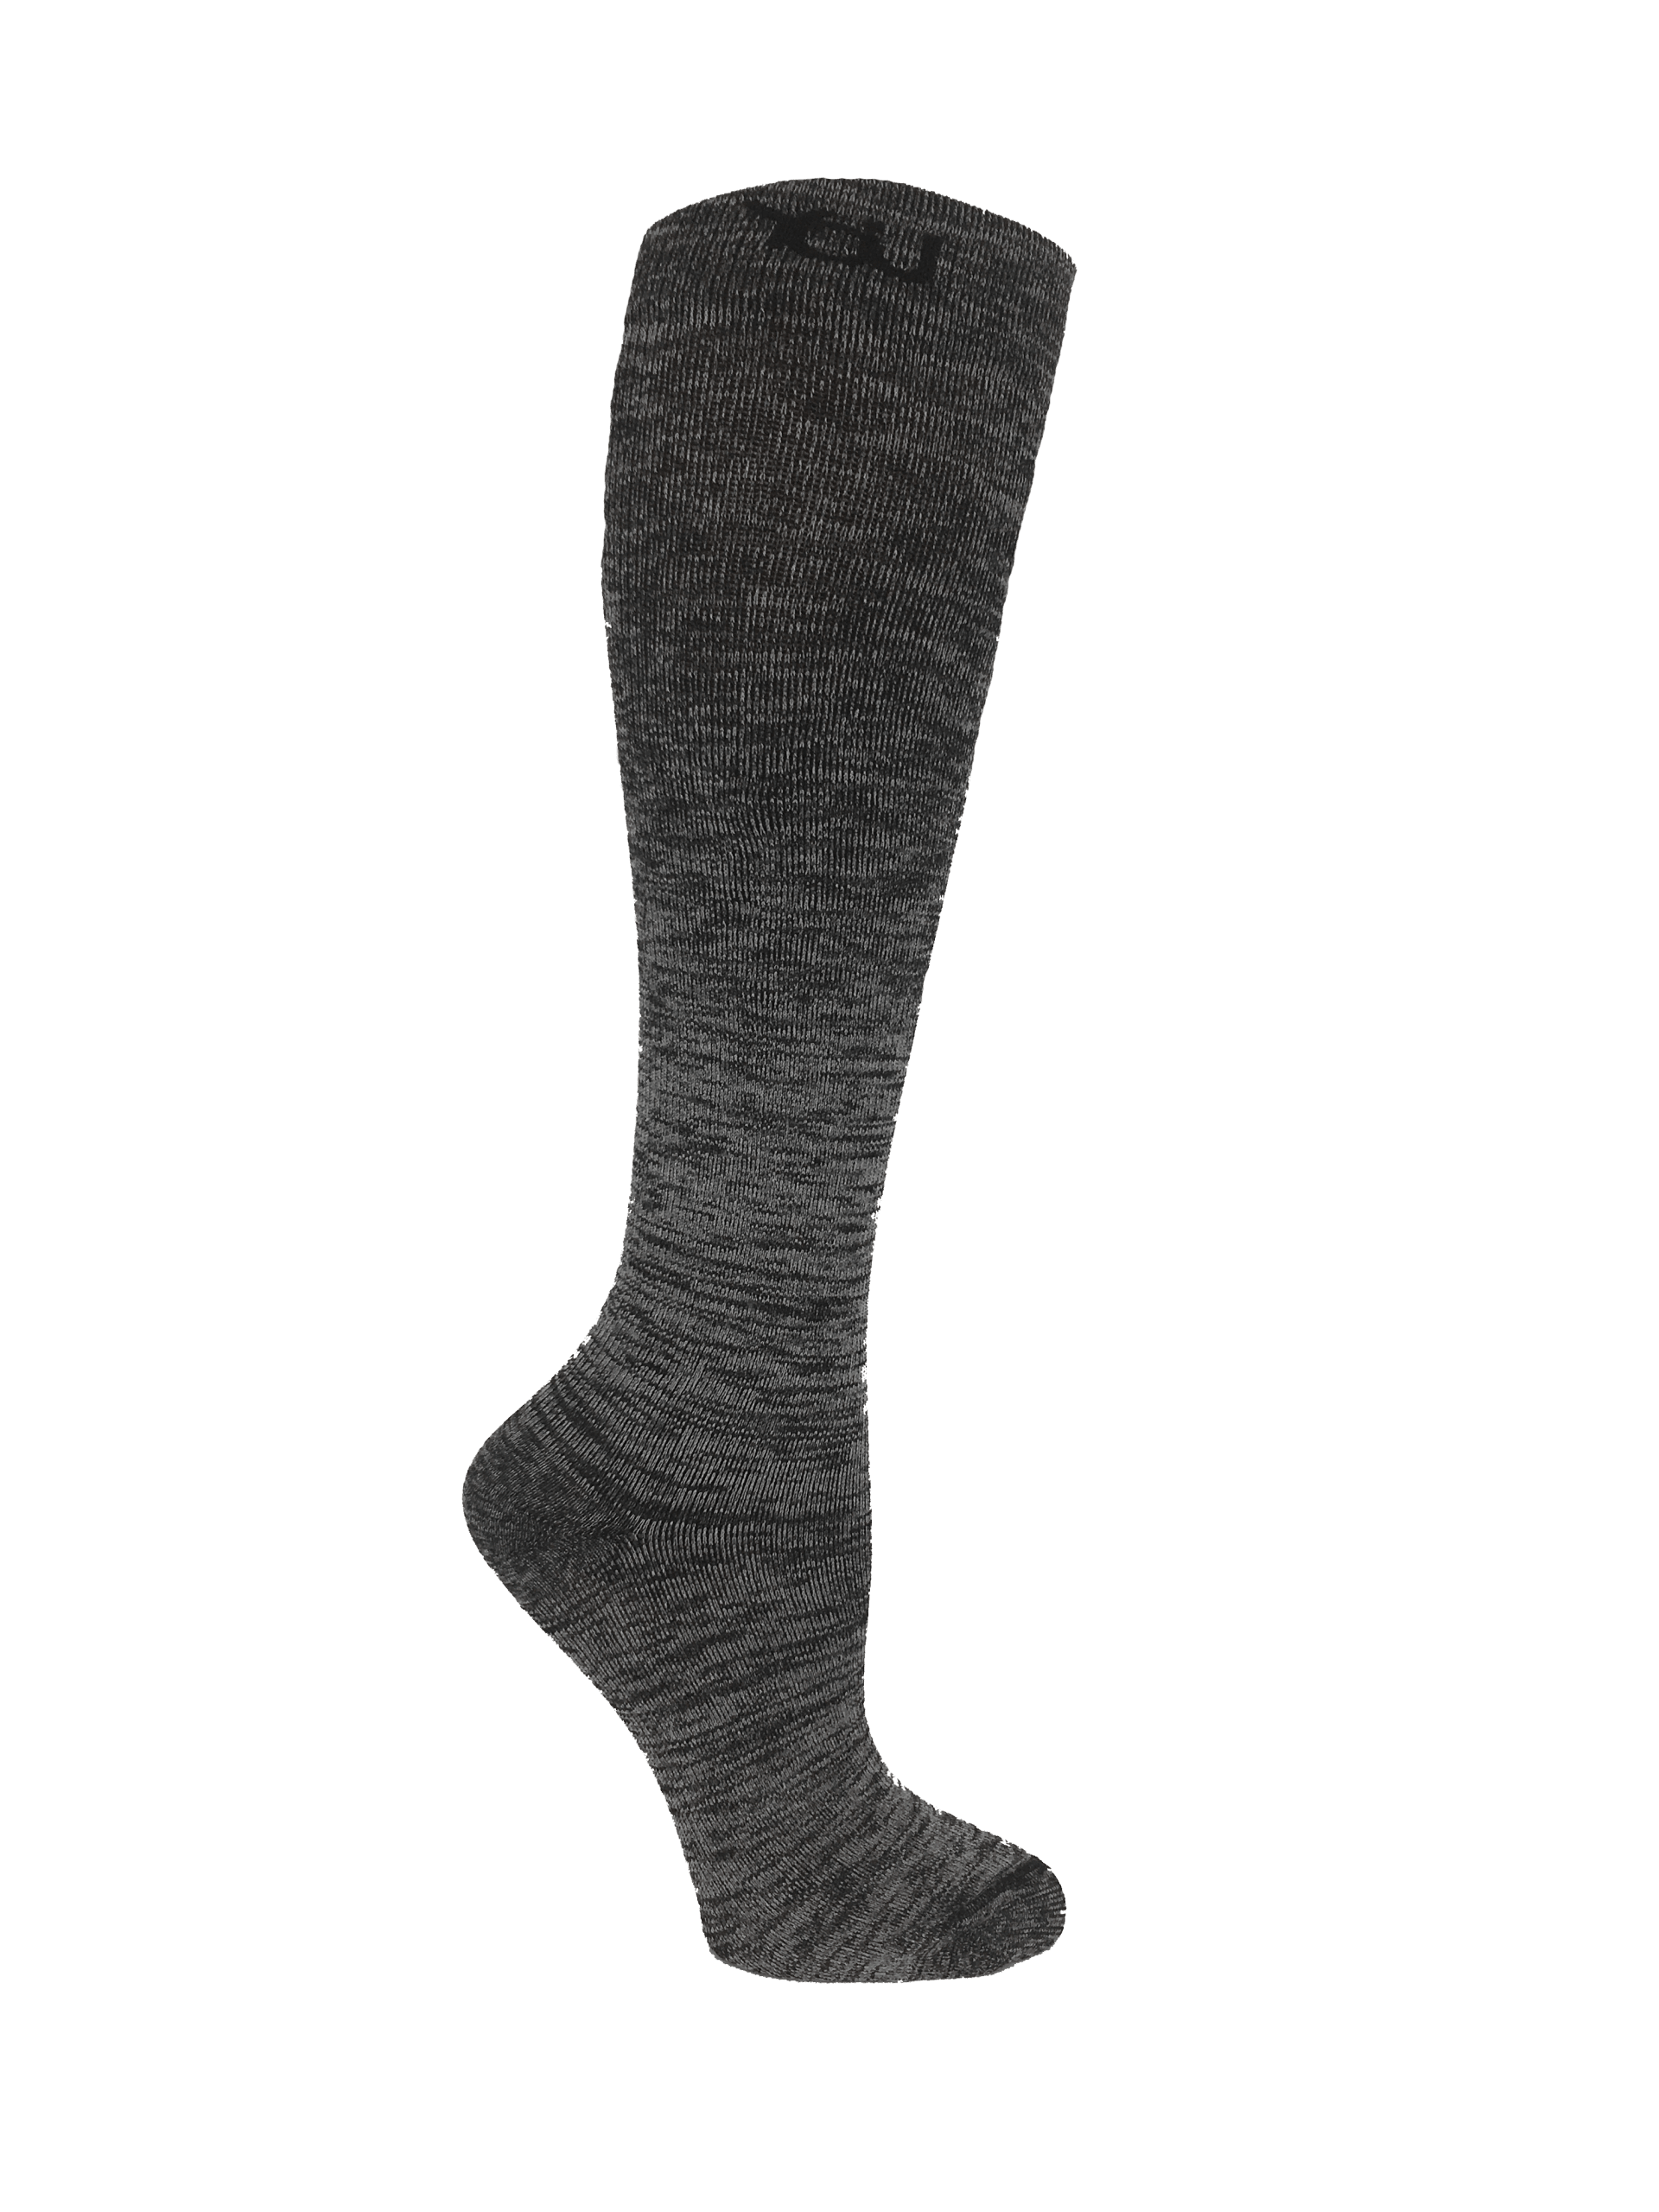 Medical Grade Compression Socks 20-30 mmHg - Knee High - 762K98-SGM Medical Grade Compression Socks 20-30 mmHg - Knee High - undefined by Supply Physical Therapy 20-30 mmhg, Compression socks